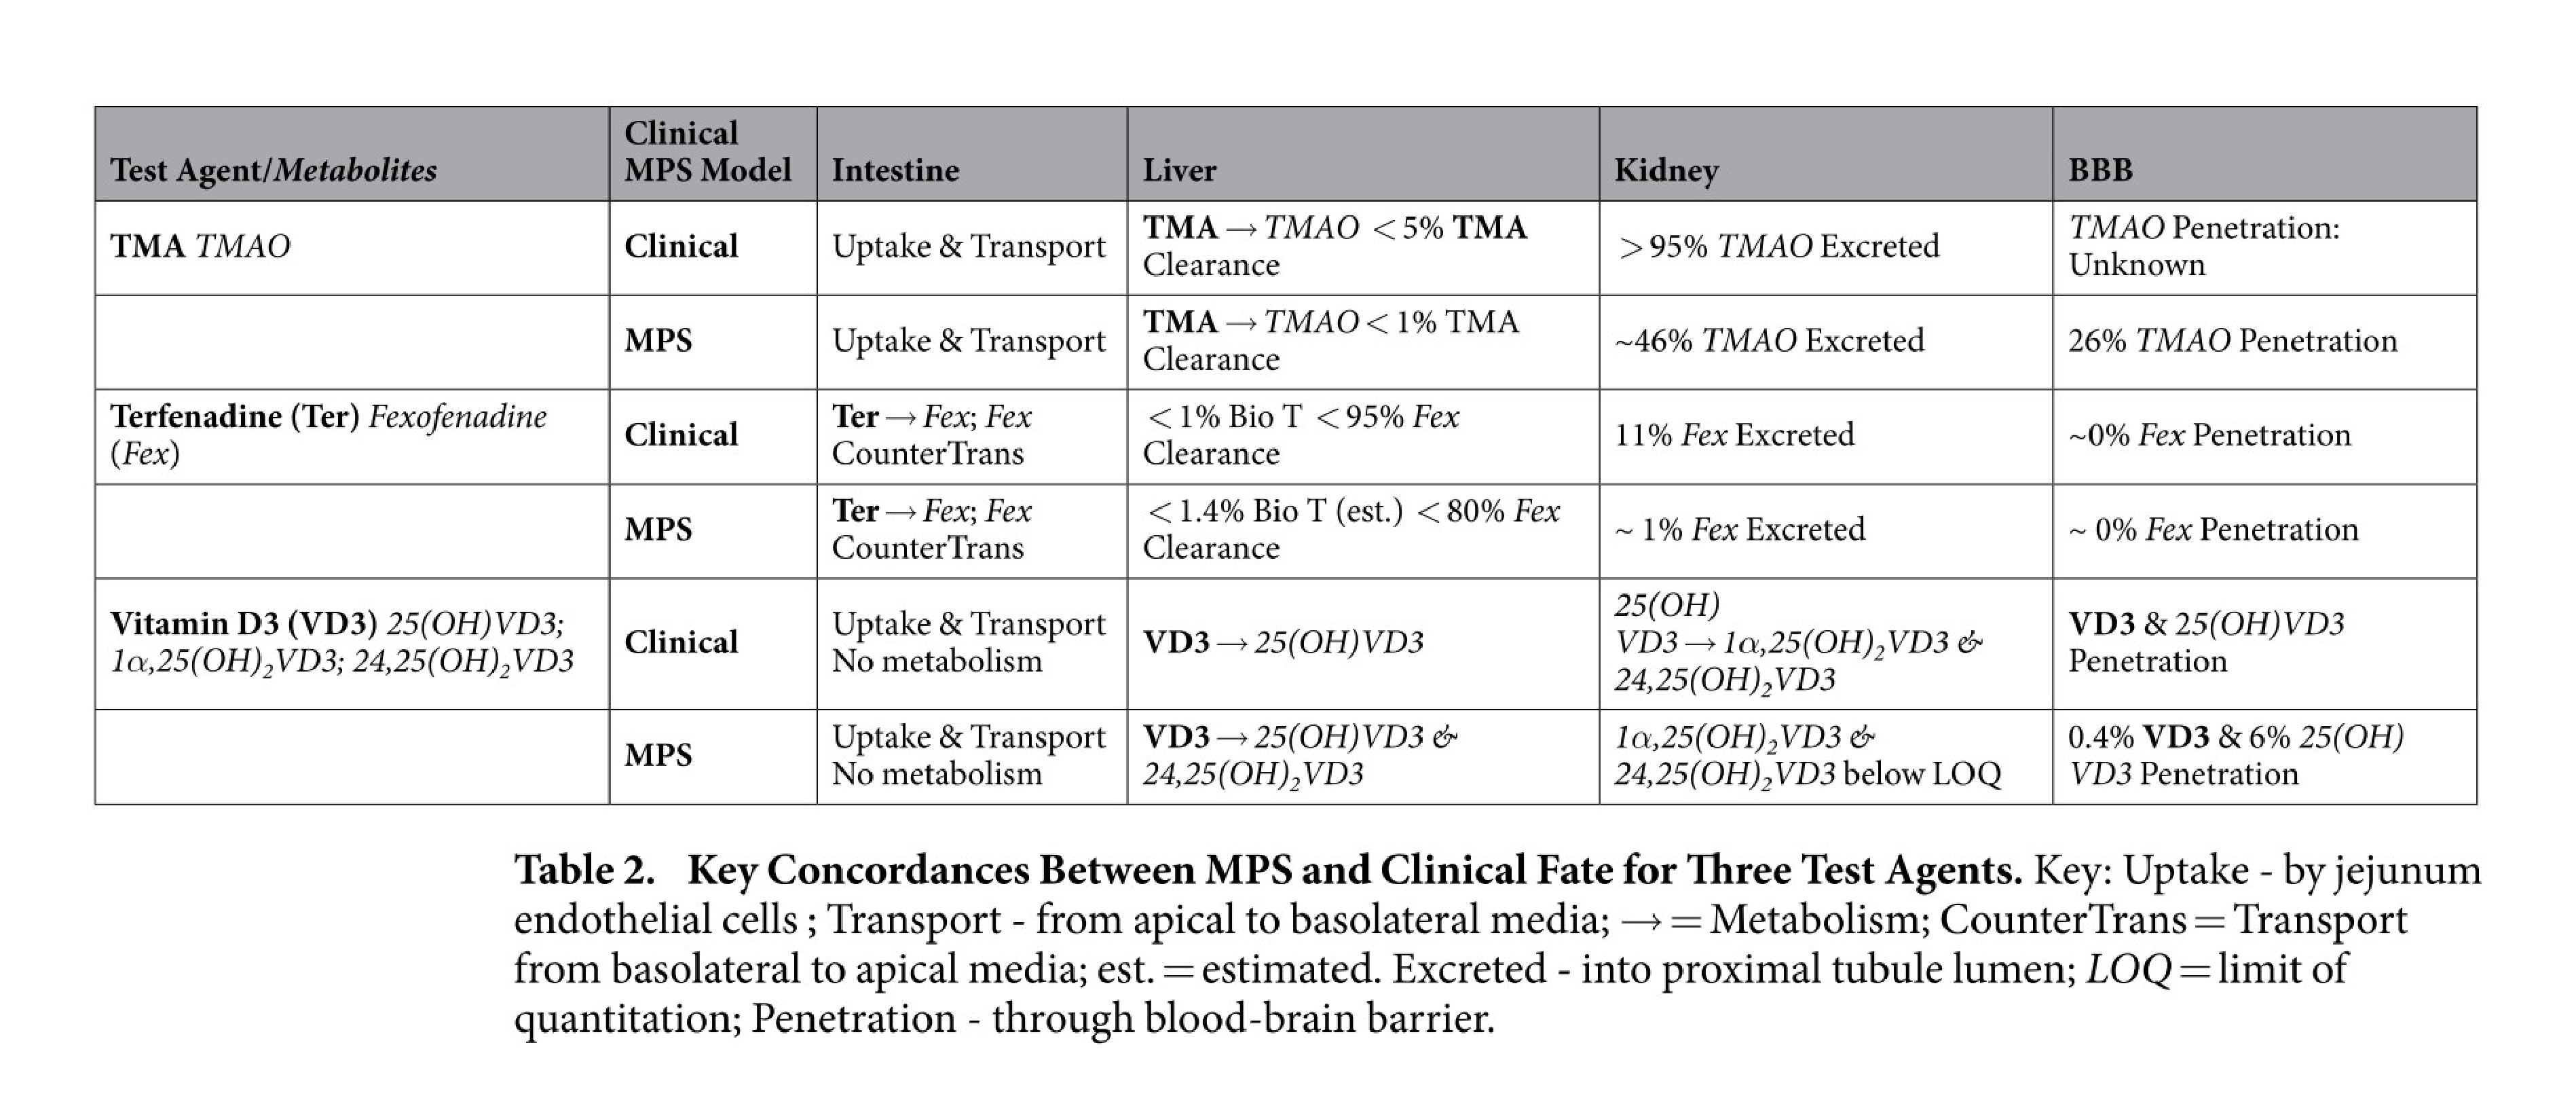 Key concordances between MPS and clinical fate for 3 test agents